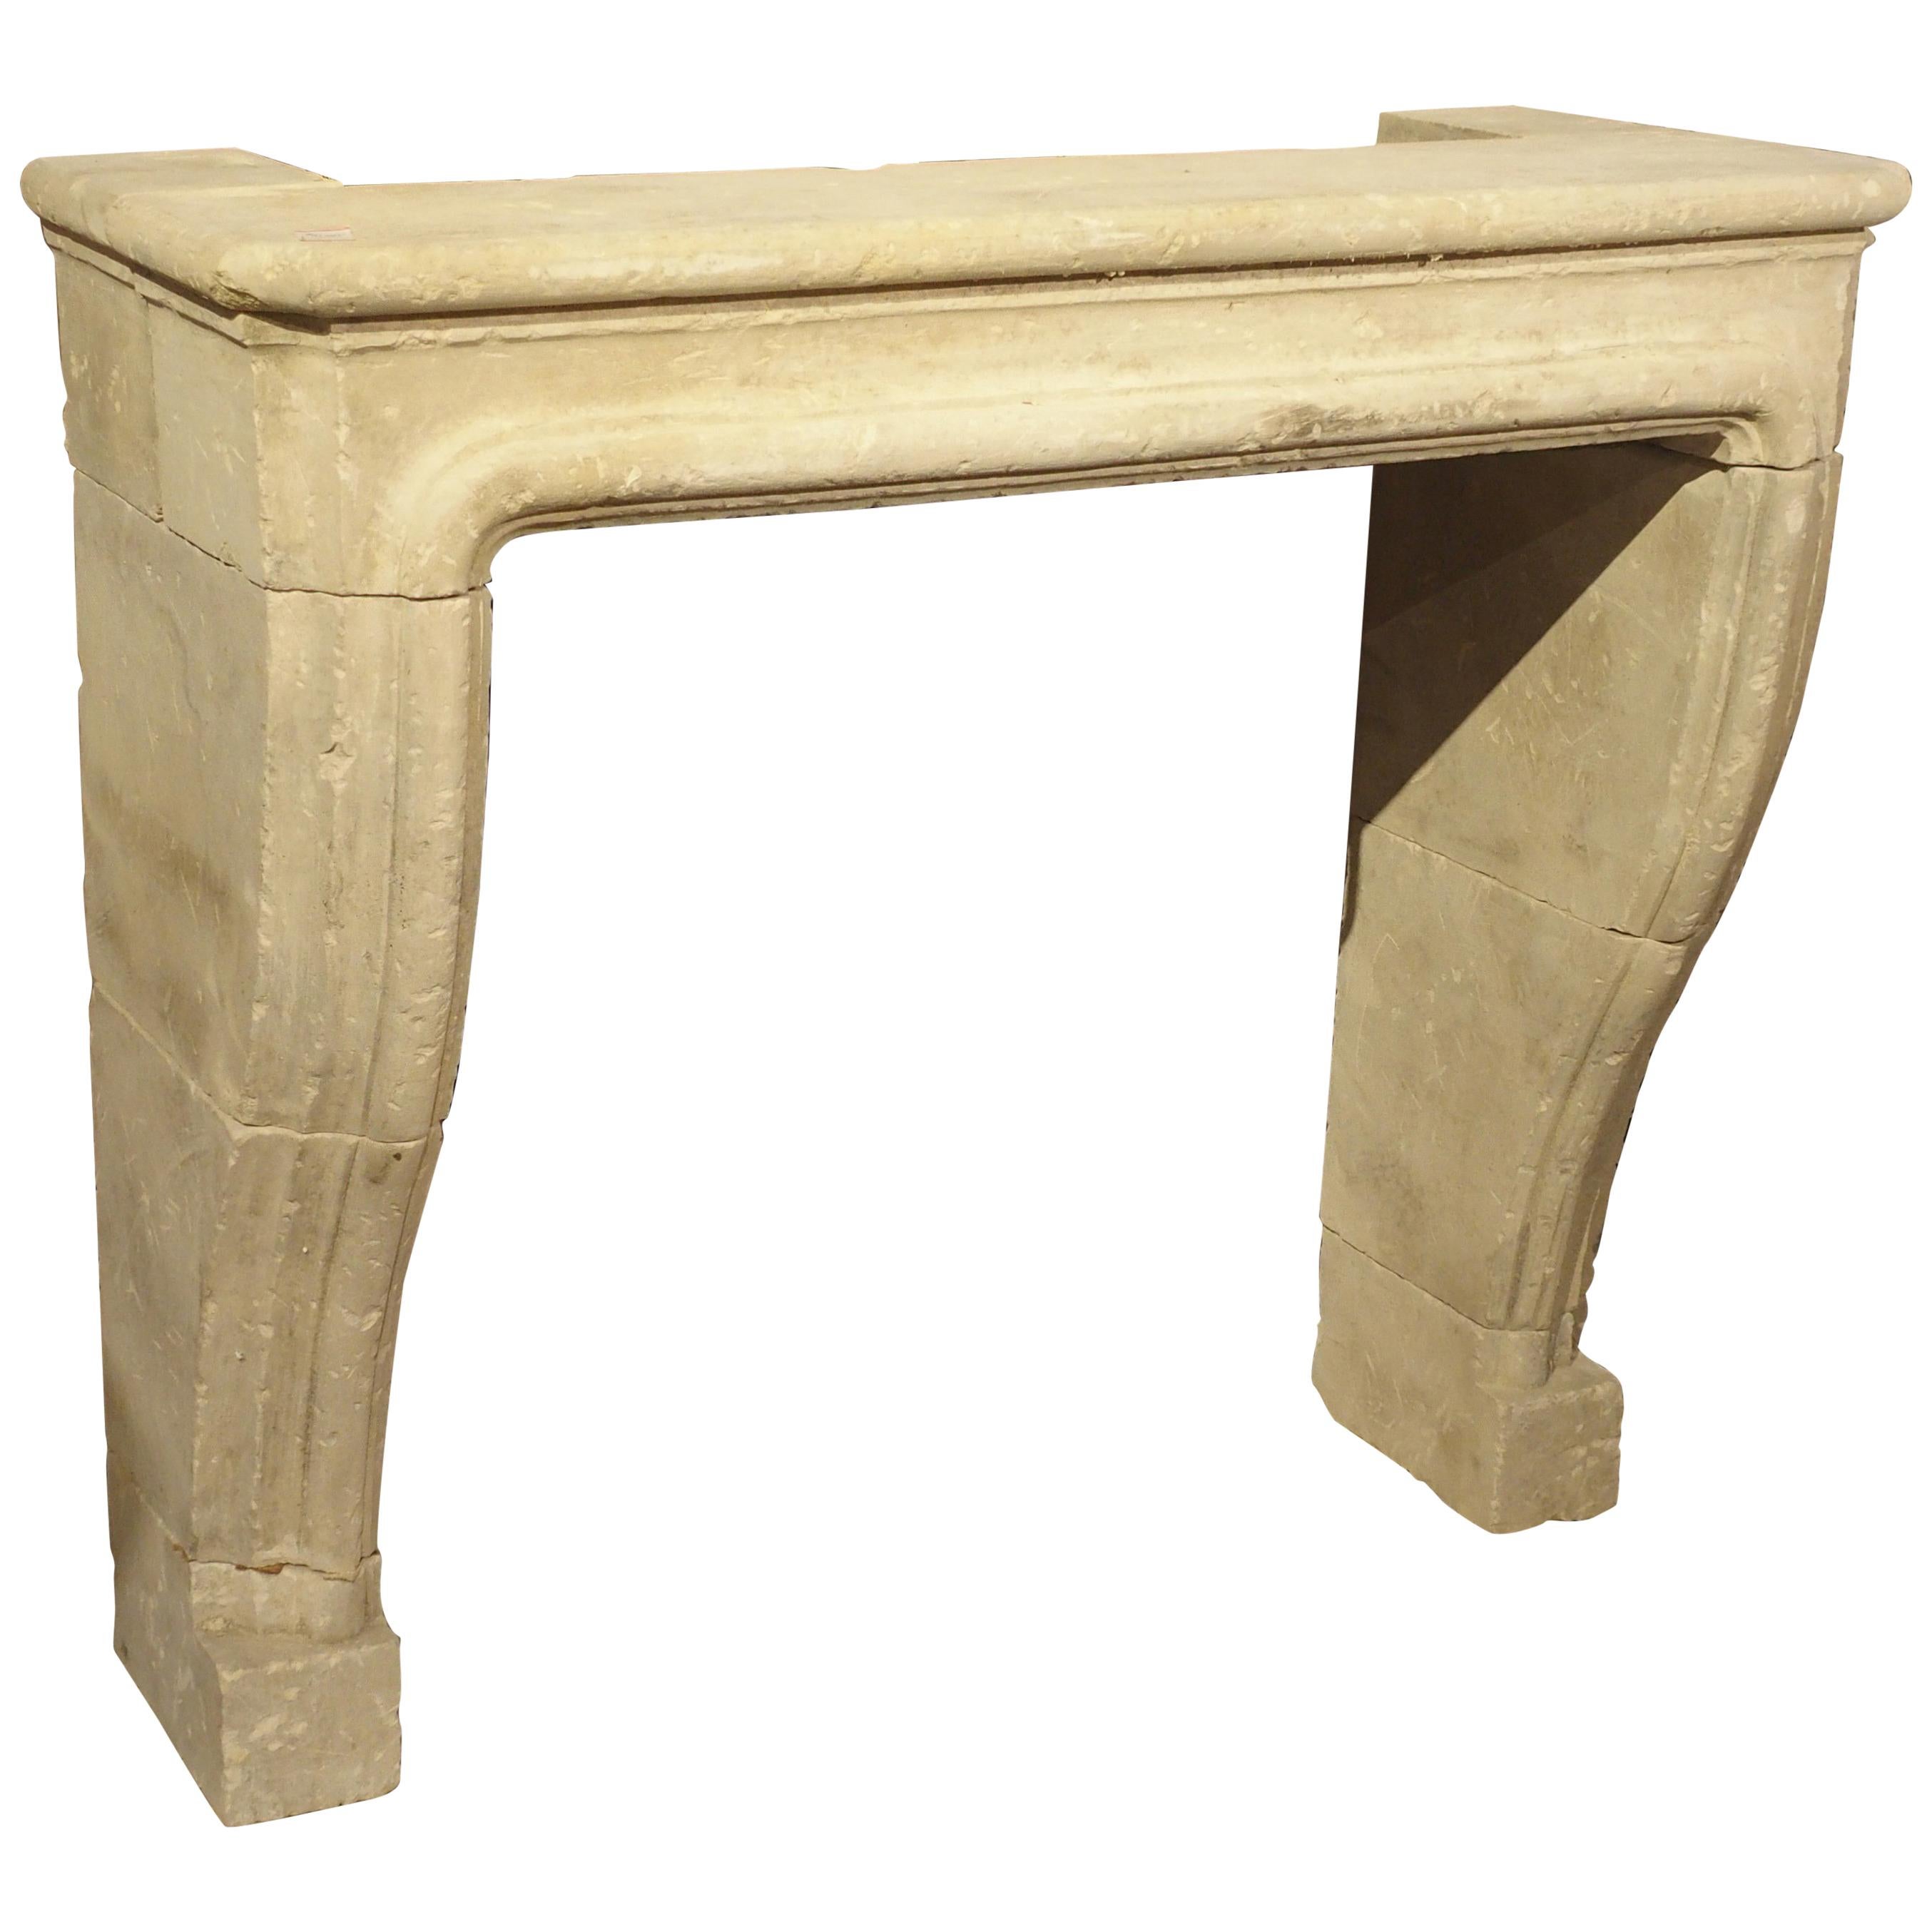 Carved and Distressed Italian Limestone Fireplace Mantel